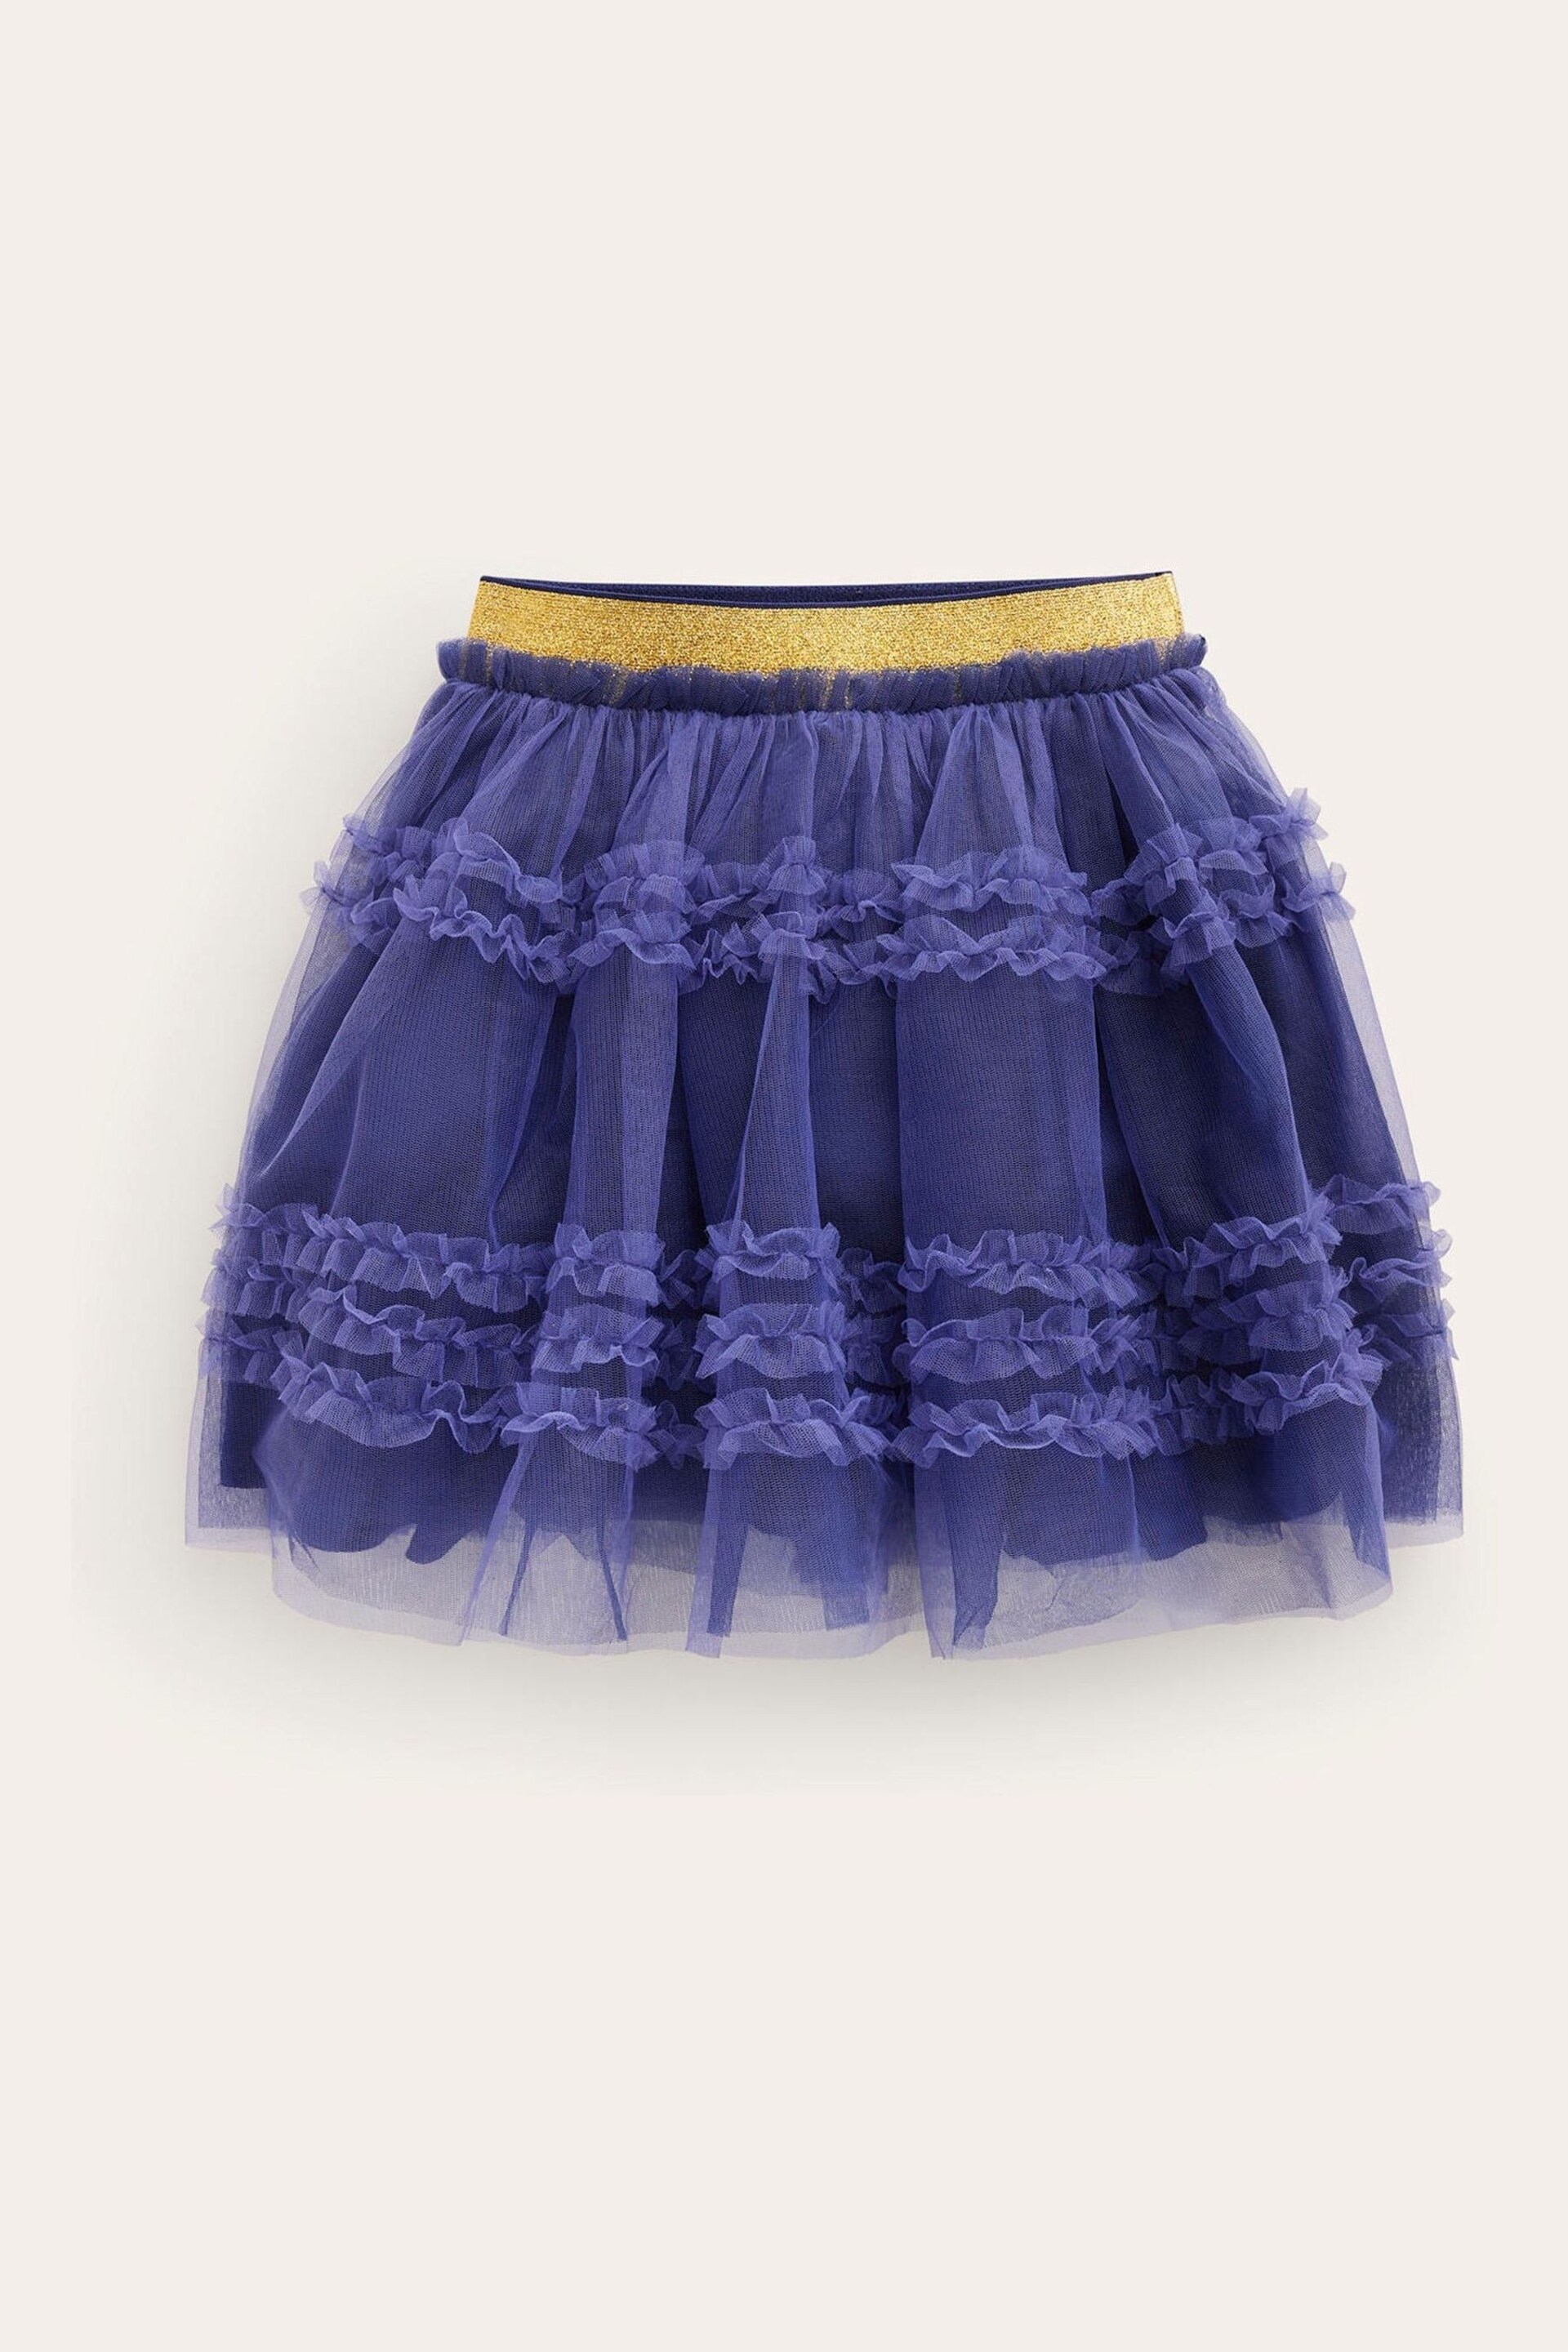 Boden Blue Tulle Party Skirt - Image 2 of 3